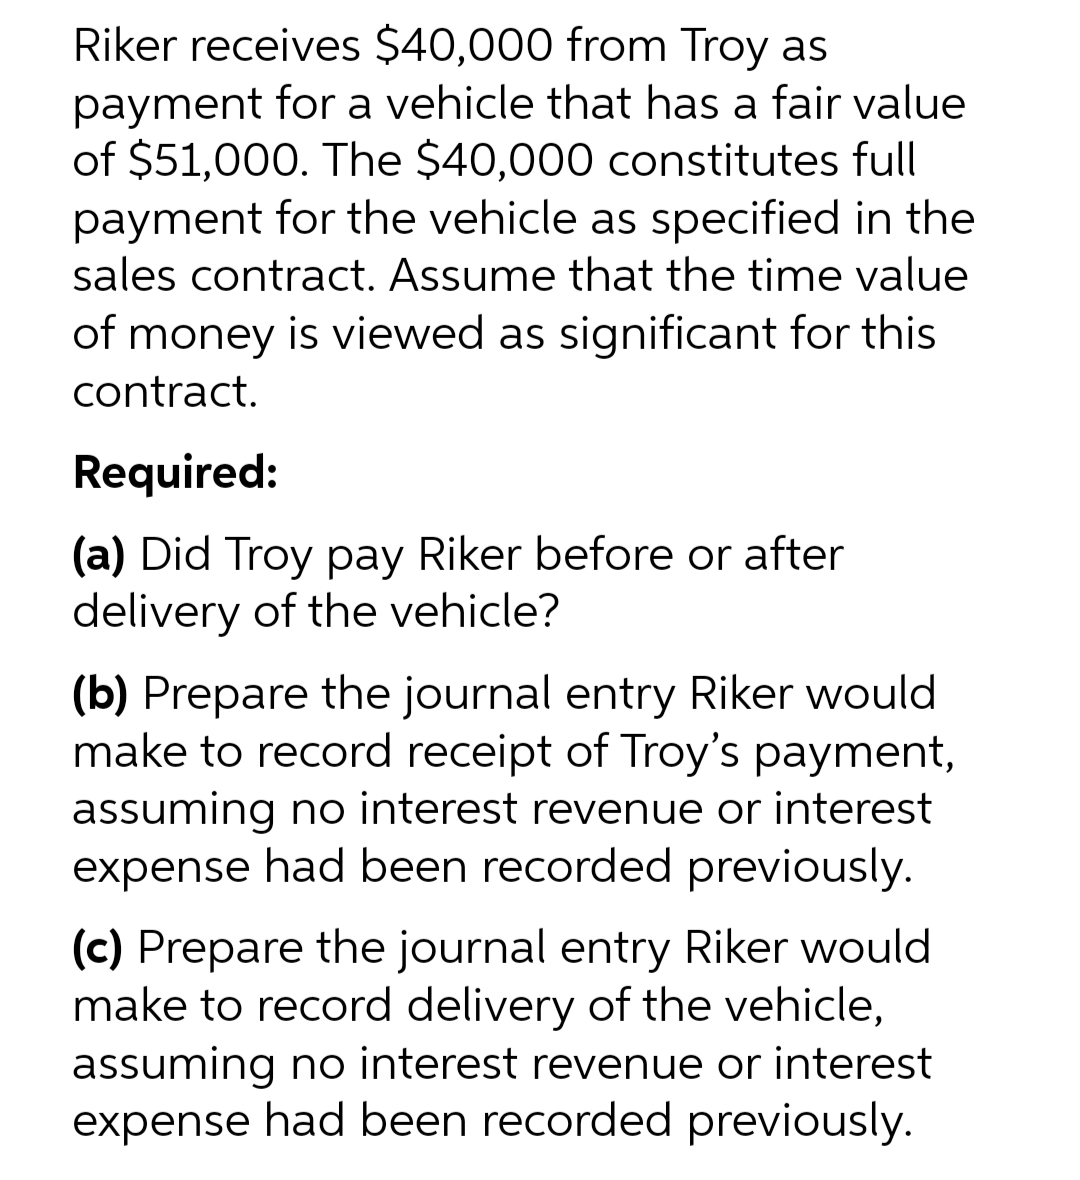 Riker receives $40,000 from Troy as
payment for a vehicle that has a fair value
of $51,000. The $40,000 constitutes full
payment for the vehicle as specified in the
sales contract. Assume that the time value
of money is viewed as significant for this
contract.
Required:
(a) Did Troy pay Riker before or after
delivery of the vehicle?
(b) Prepare the journal entry Riker would
make to record receipt of Troy's payment,
assuming no interest revenue or interest
expense had been recorded previously.
(c) Prepare the journal entry Riker would
make to record delivery of the vehicle,
assuming no interest revenue or interest
expense had been recorded previously.